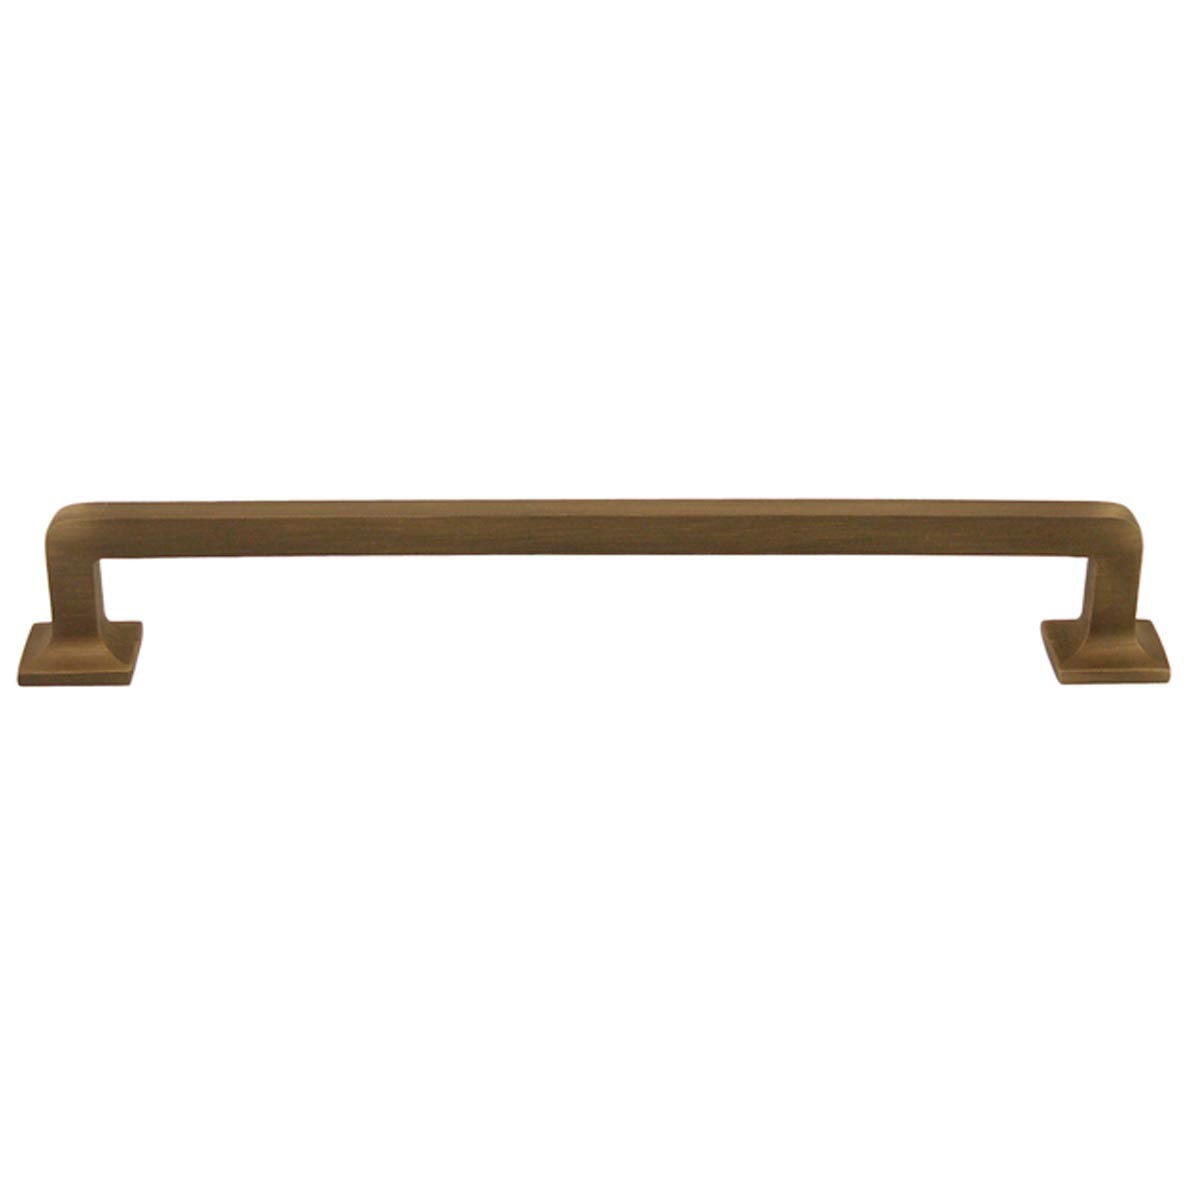 Substantial 12" Brass Cabinet Handle, Paxton Hardware